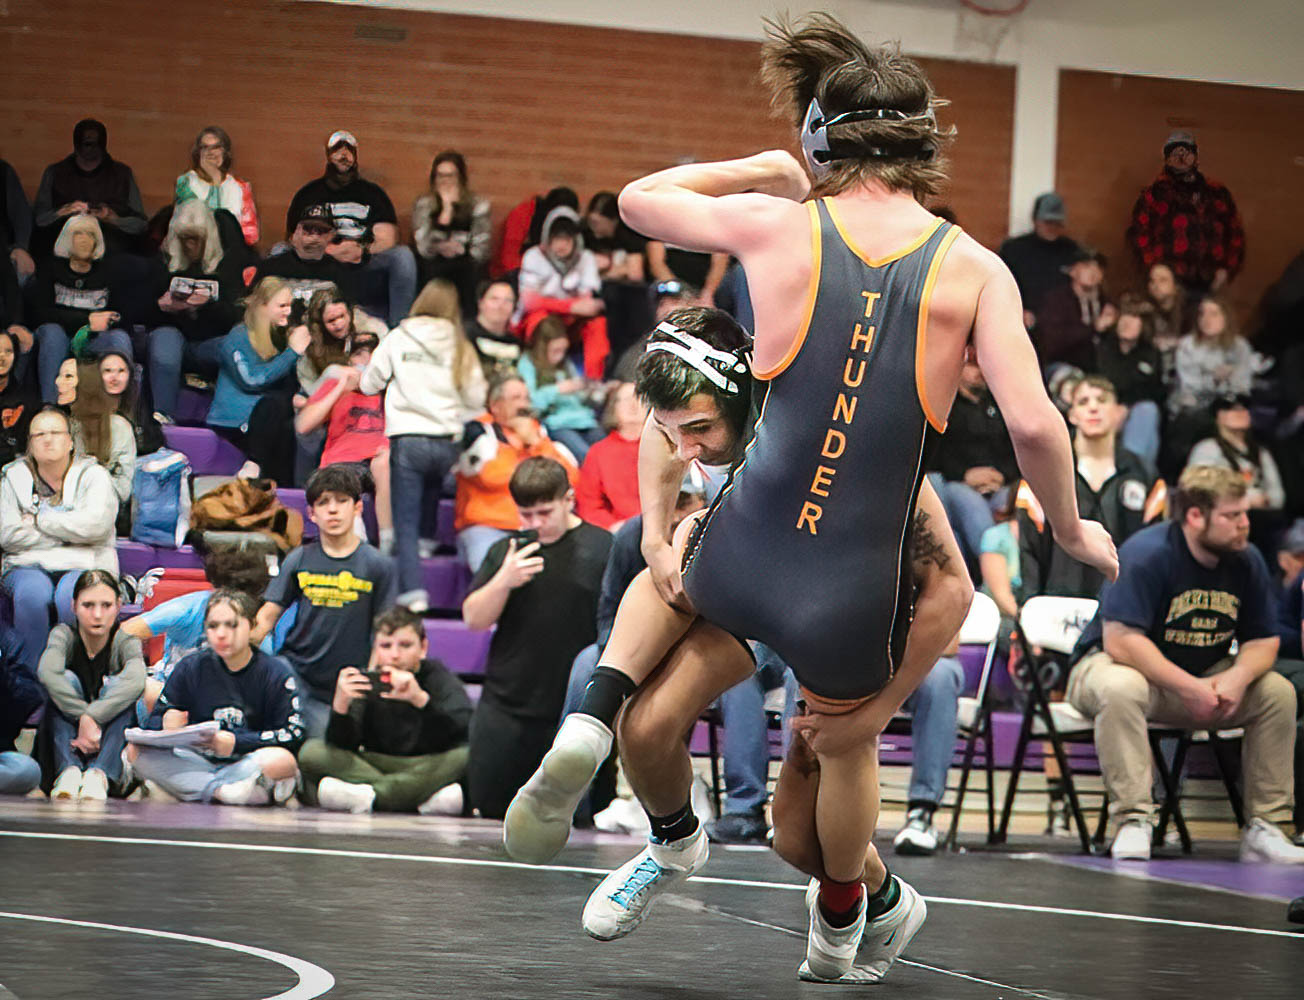 Eddie Bowman delivers his Lamar opponent to the mat in a takedown worthy of the football field.